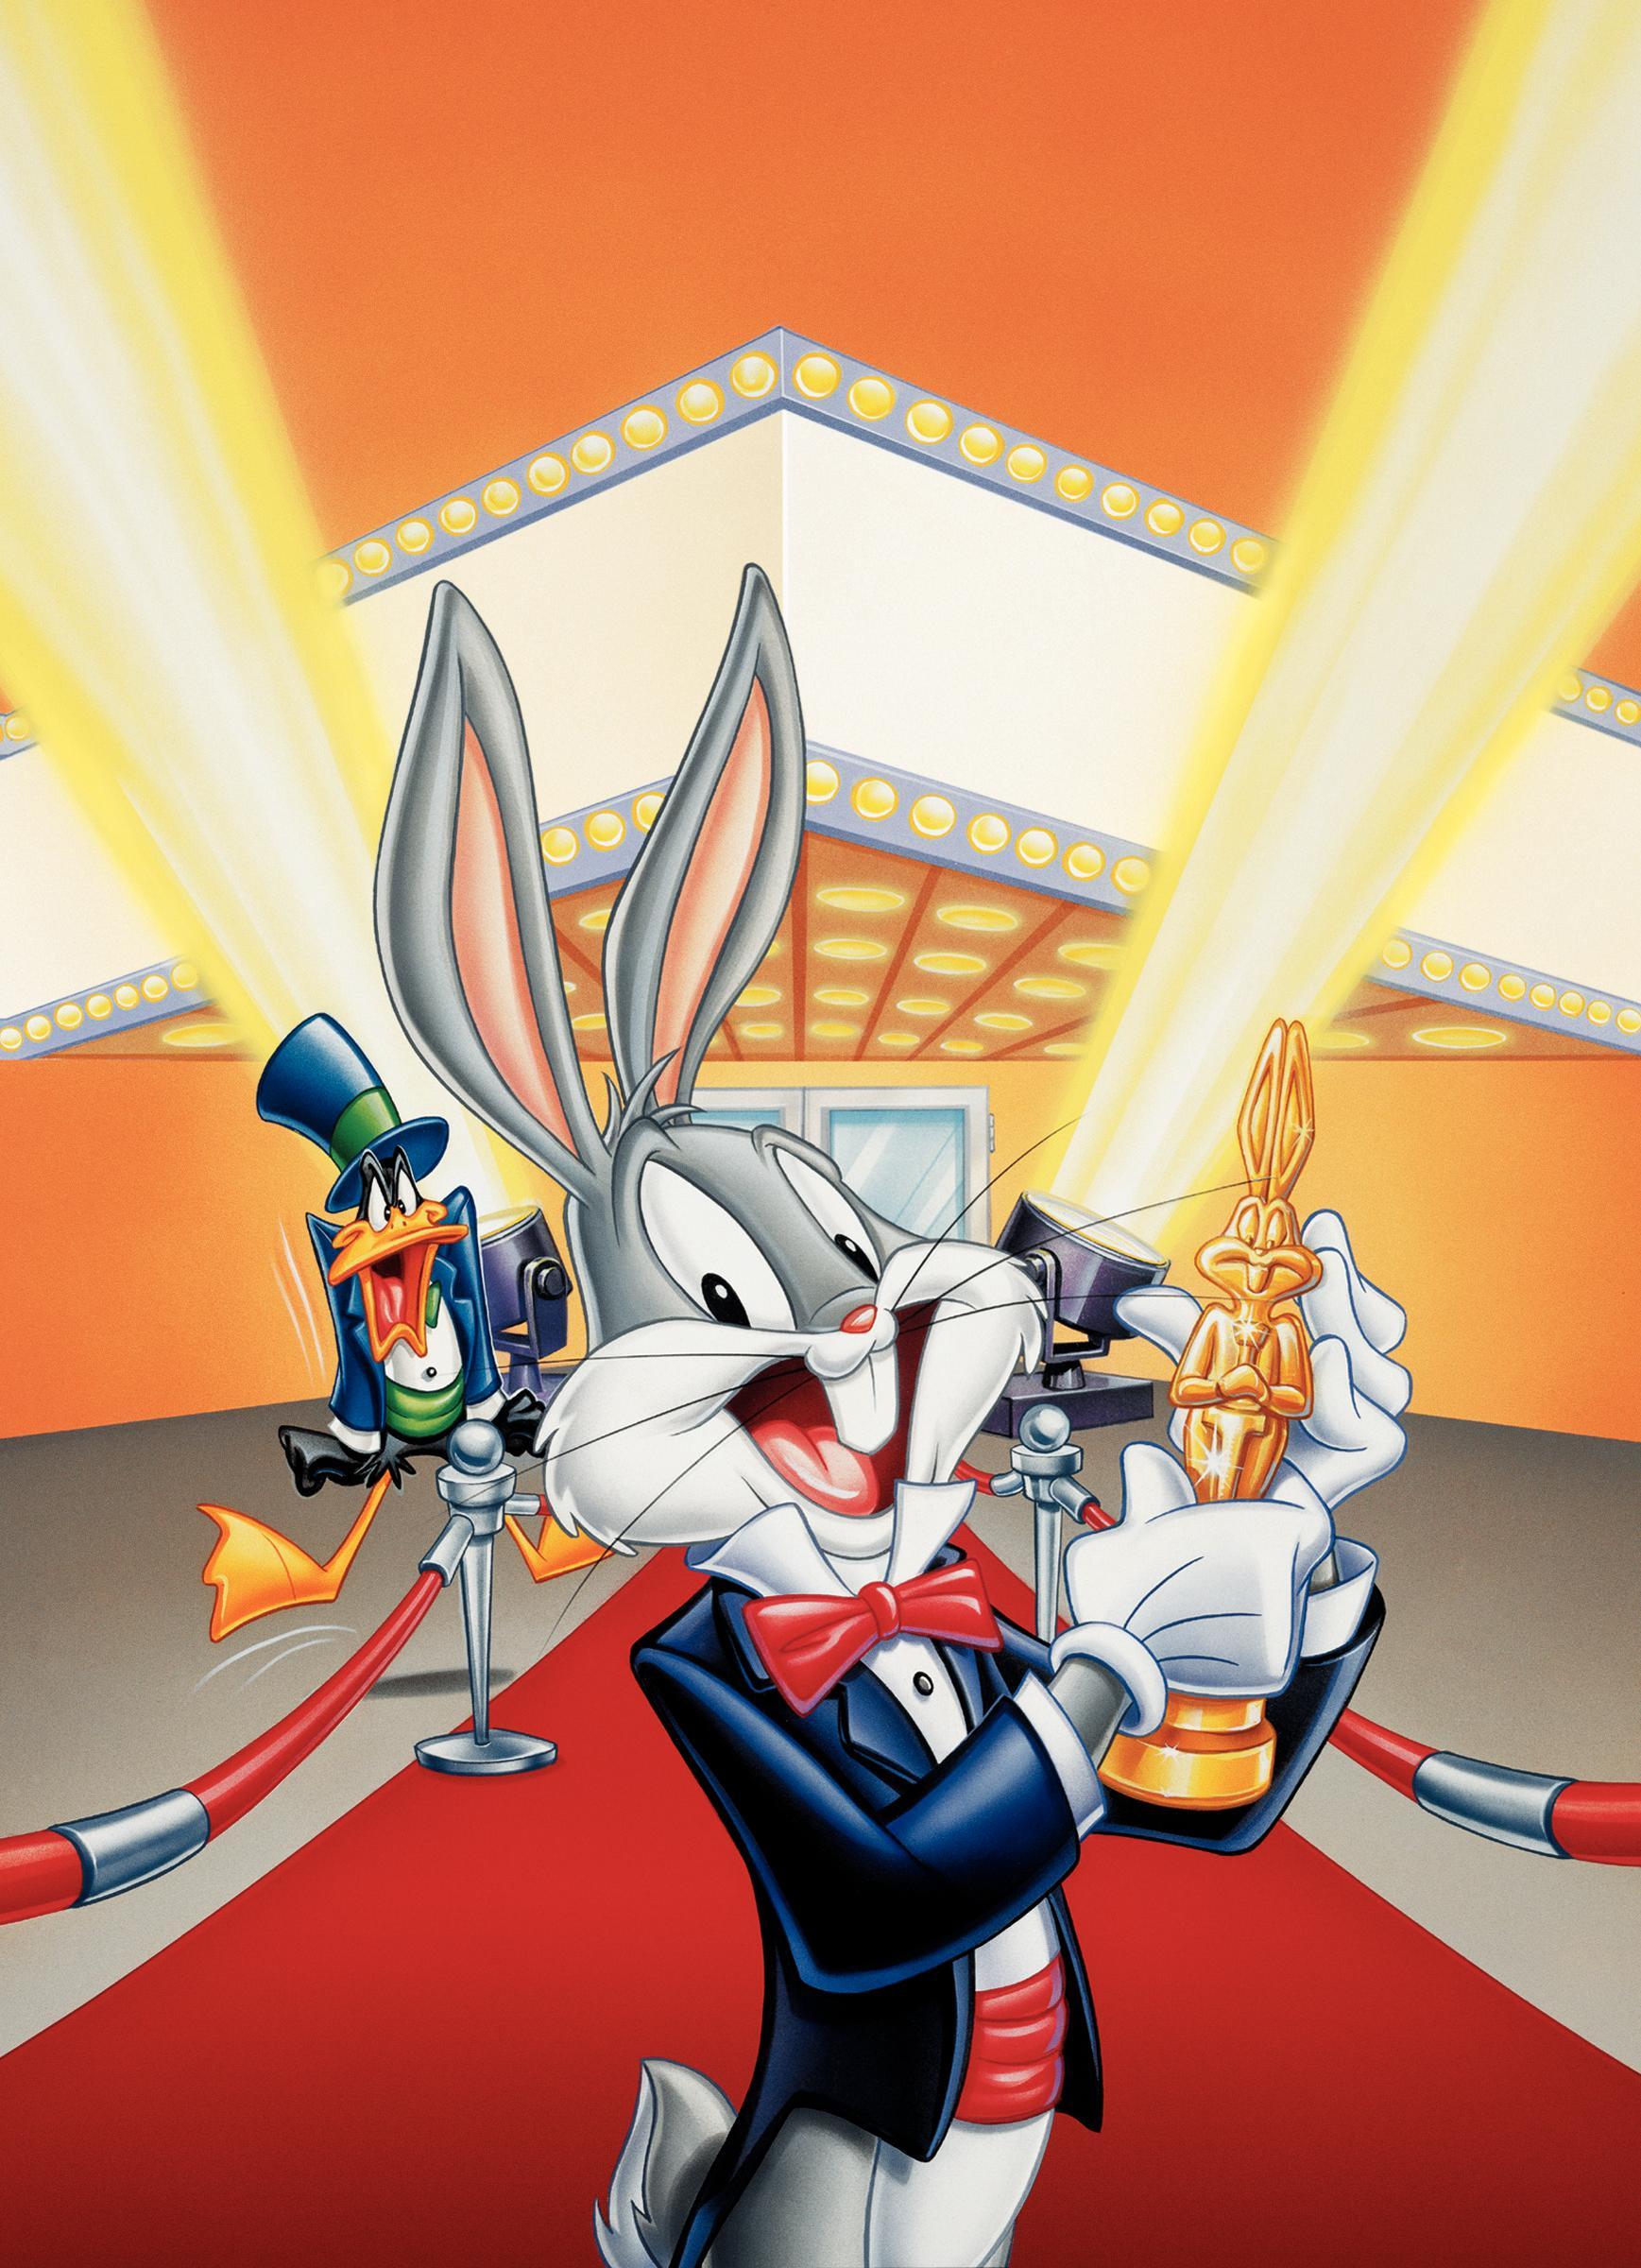 Bugs Bunny image Bugs is the Best HD wallpaper and background